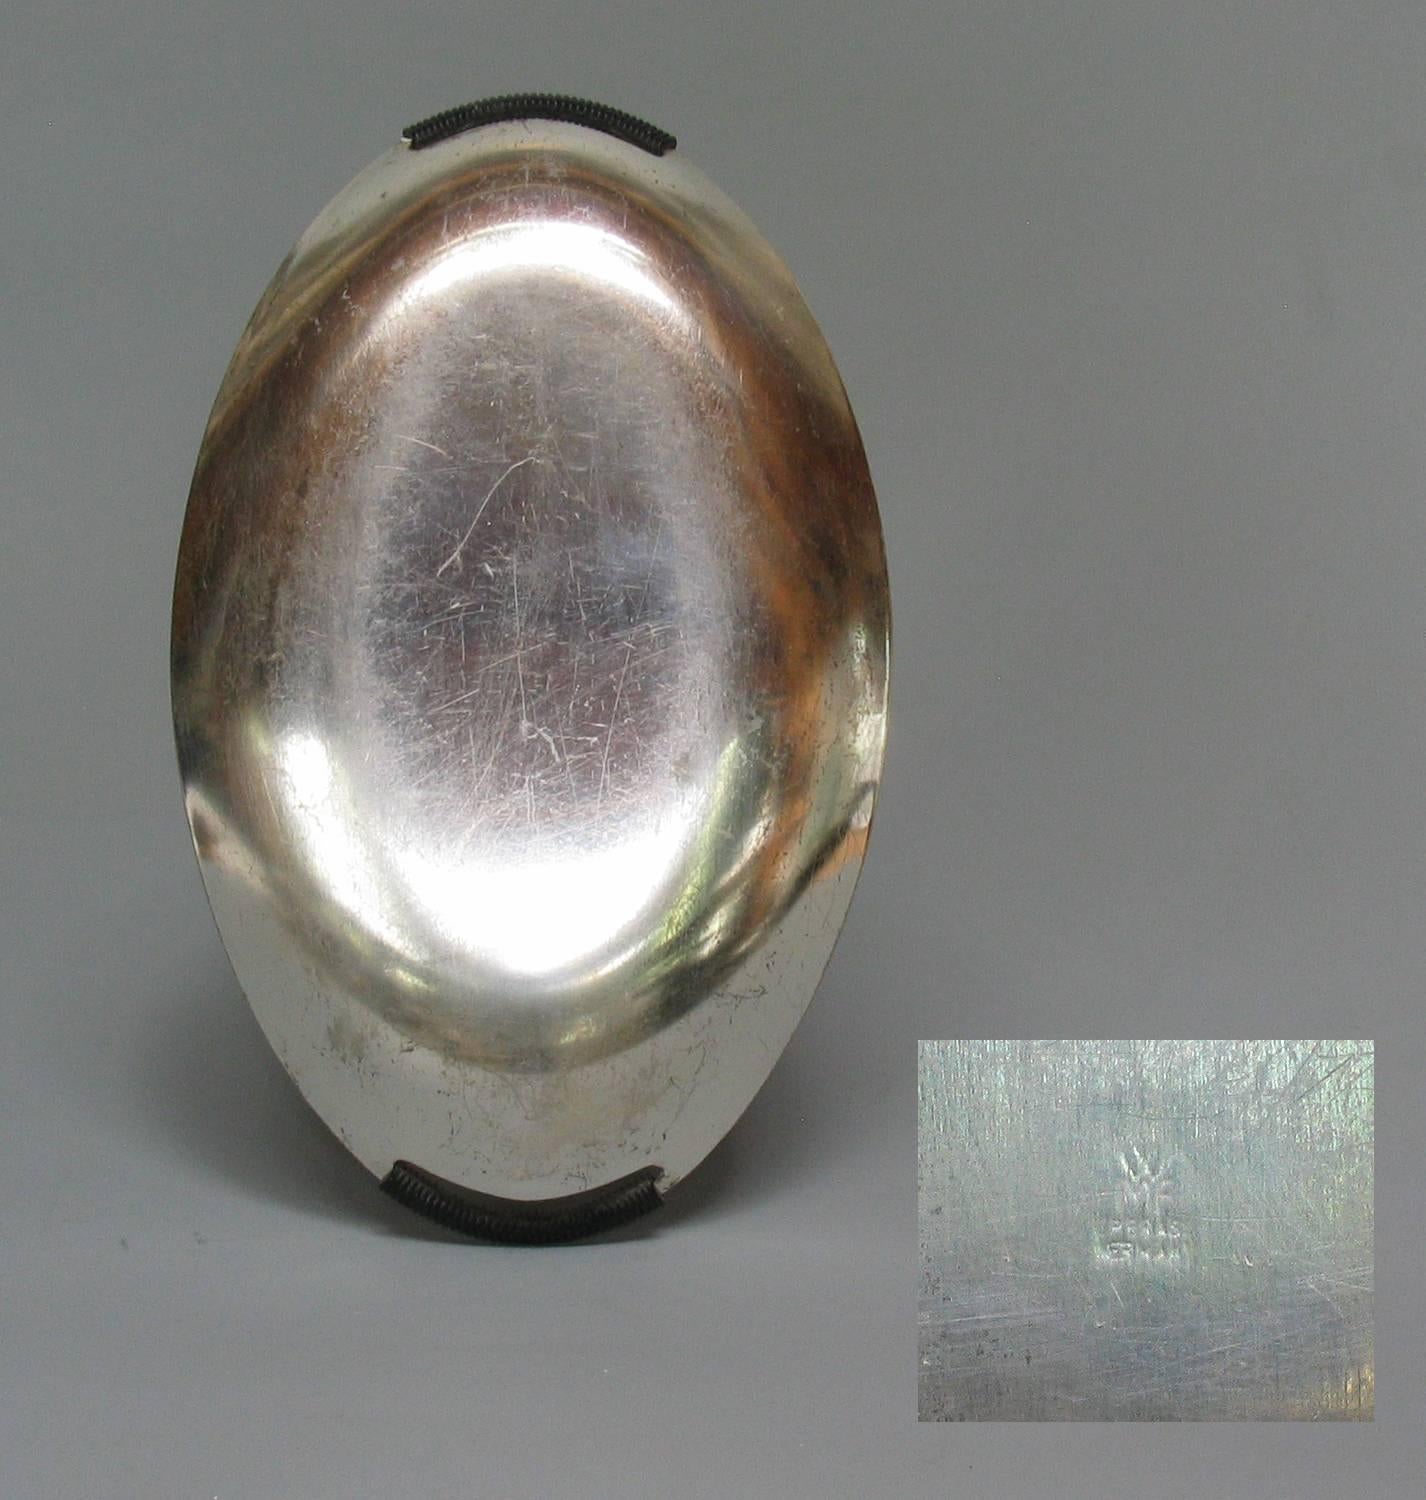 Mid-20th Century WMF Silverplate Modernist Plate Sigrid Kupetz Design with Small Oval Bowl For Sale